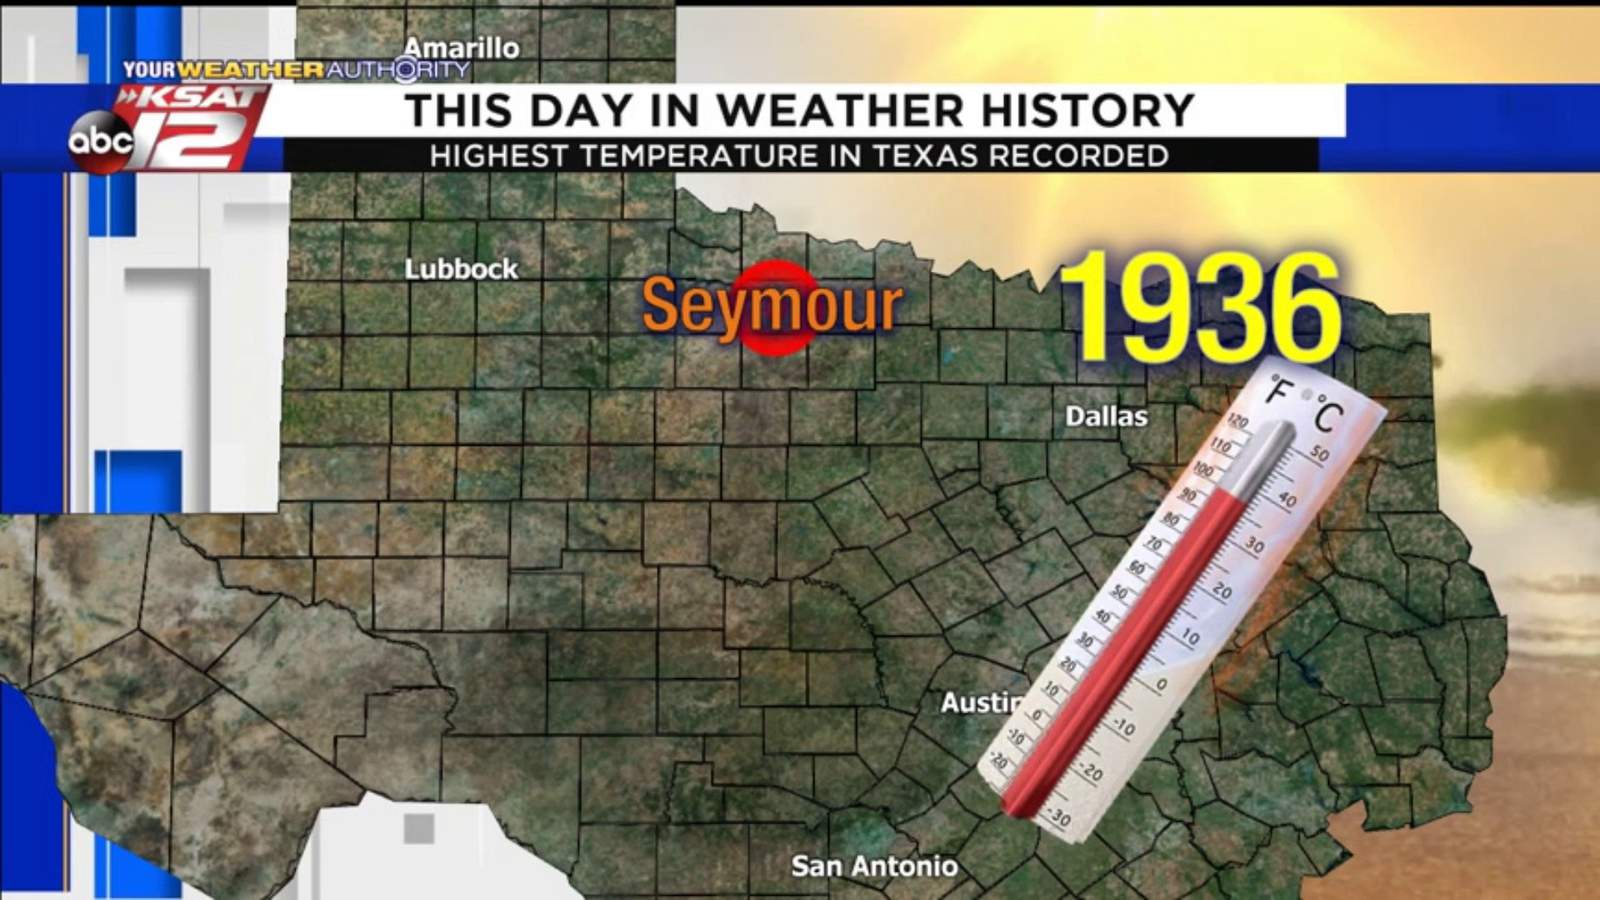 This Day in Weather History: August 12th